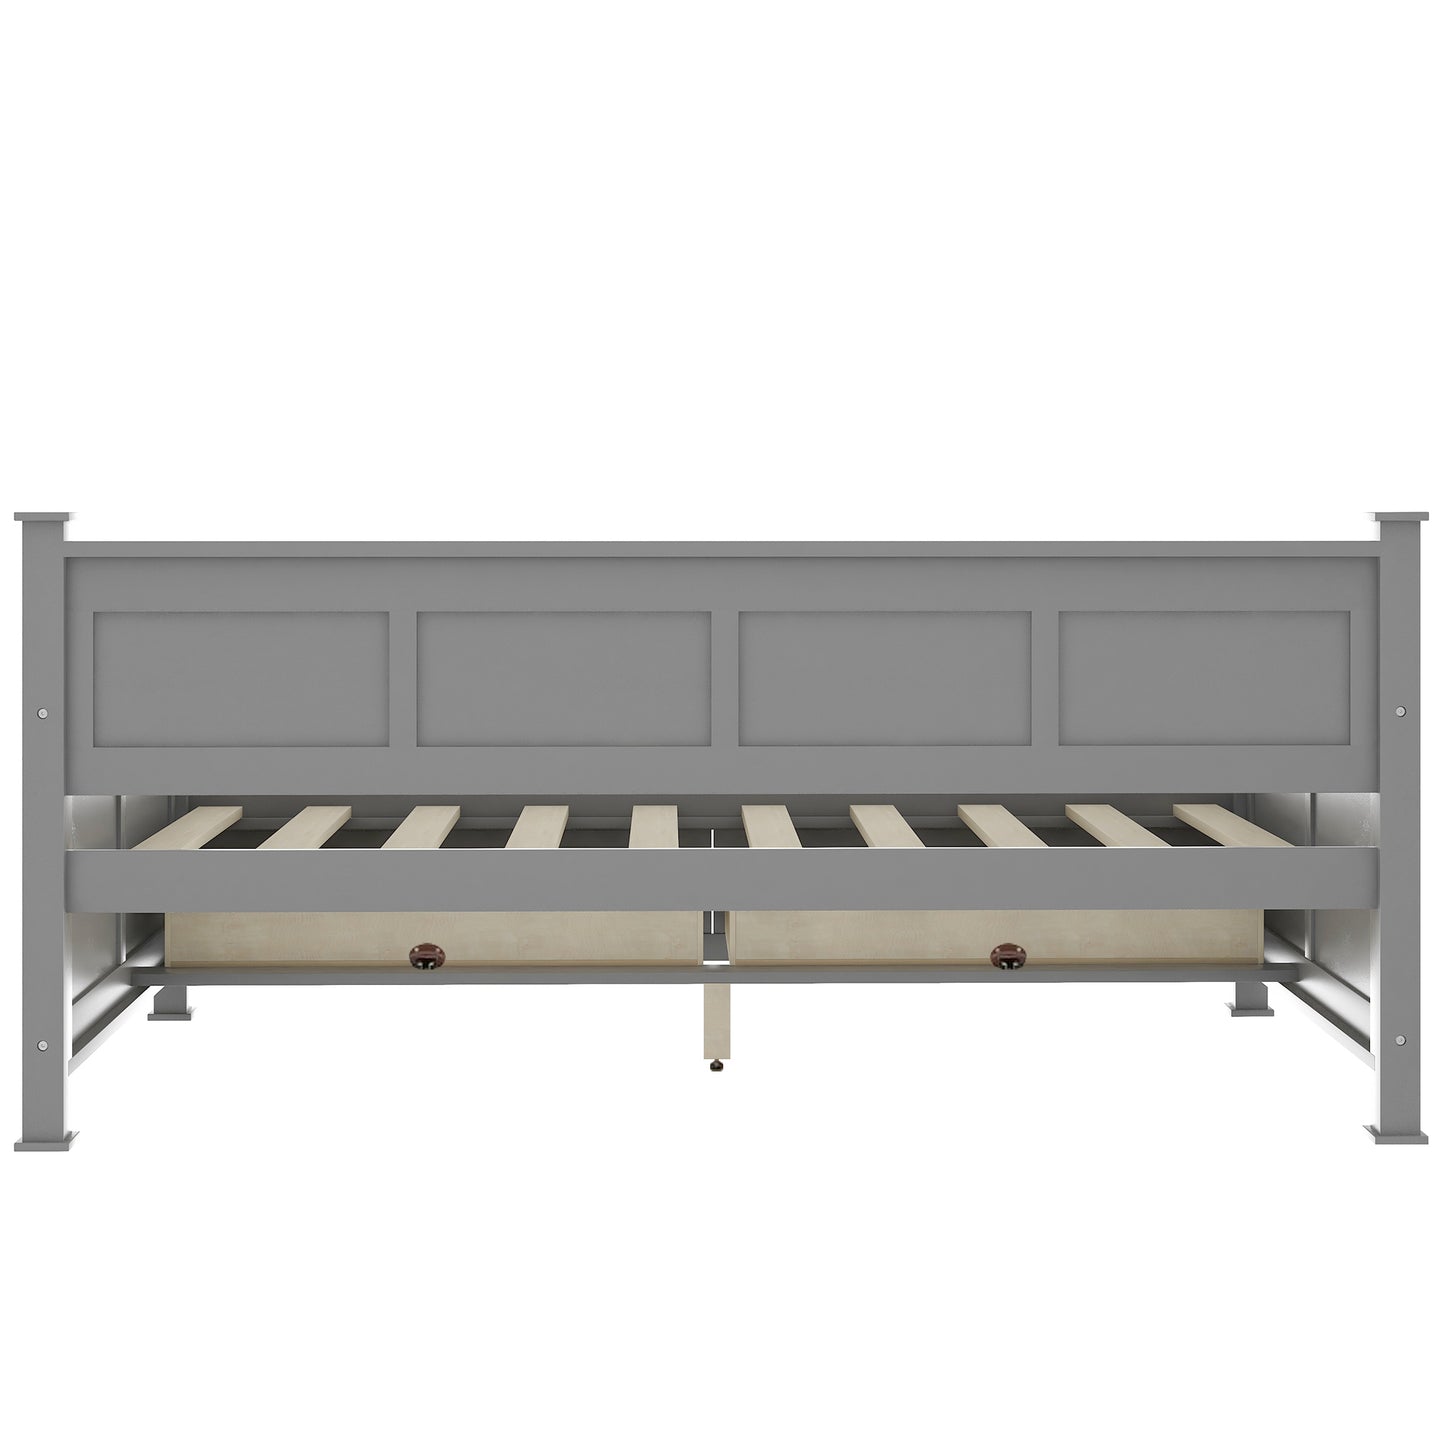 Twin Size Daybed with 2 Large Drawers, X-shaped Frame, Modern and Rustic Casual Style Daybed, Gray